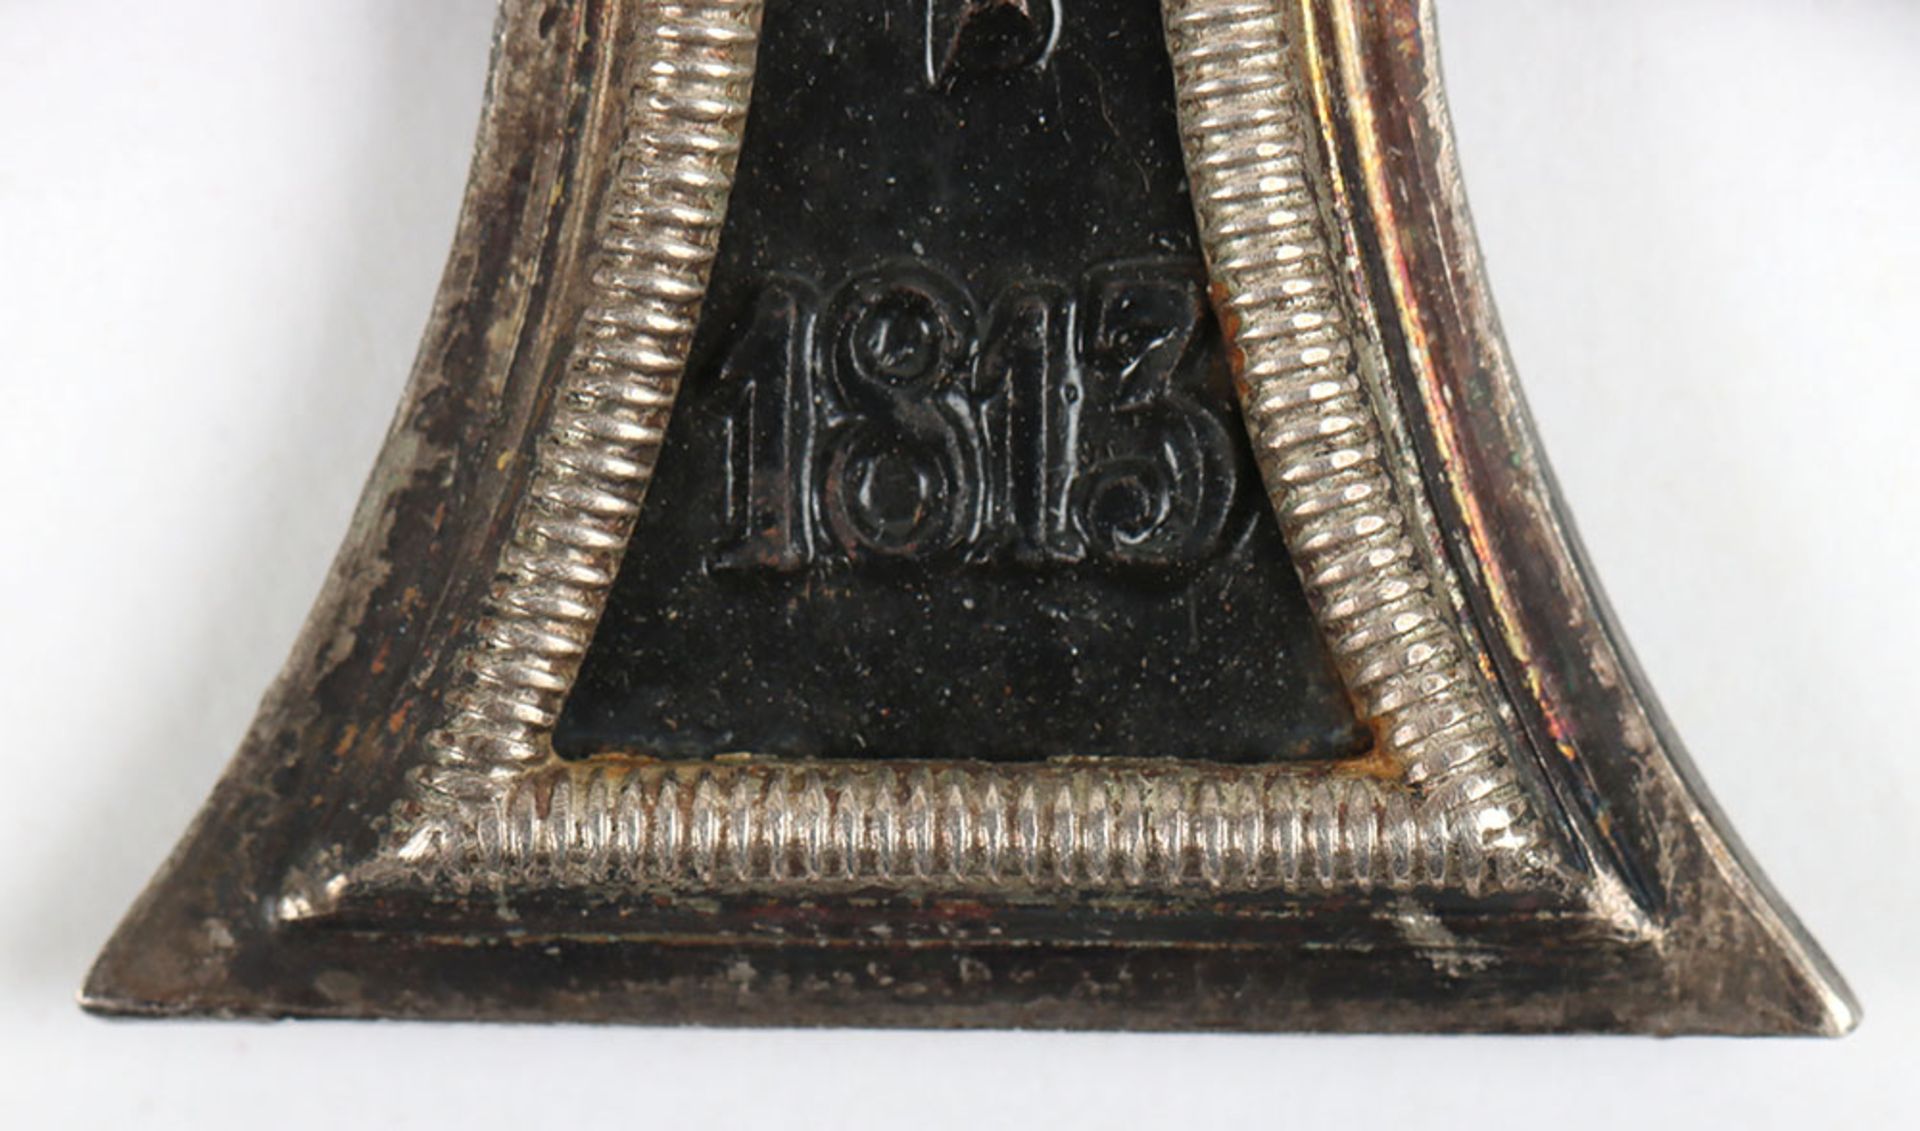 1914 Iron Cross 2nd Class with Presentation Case - Image 14 of 15